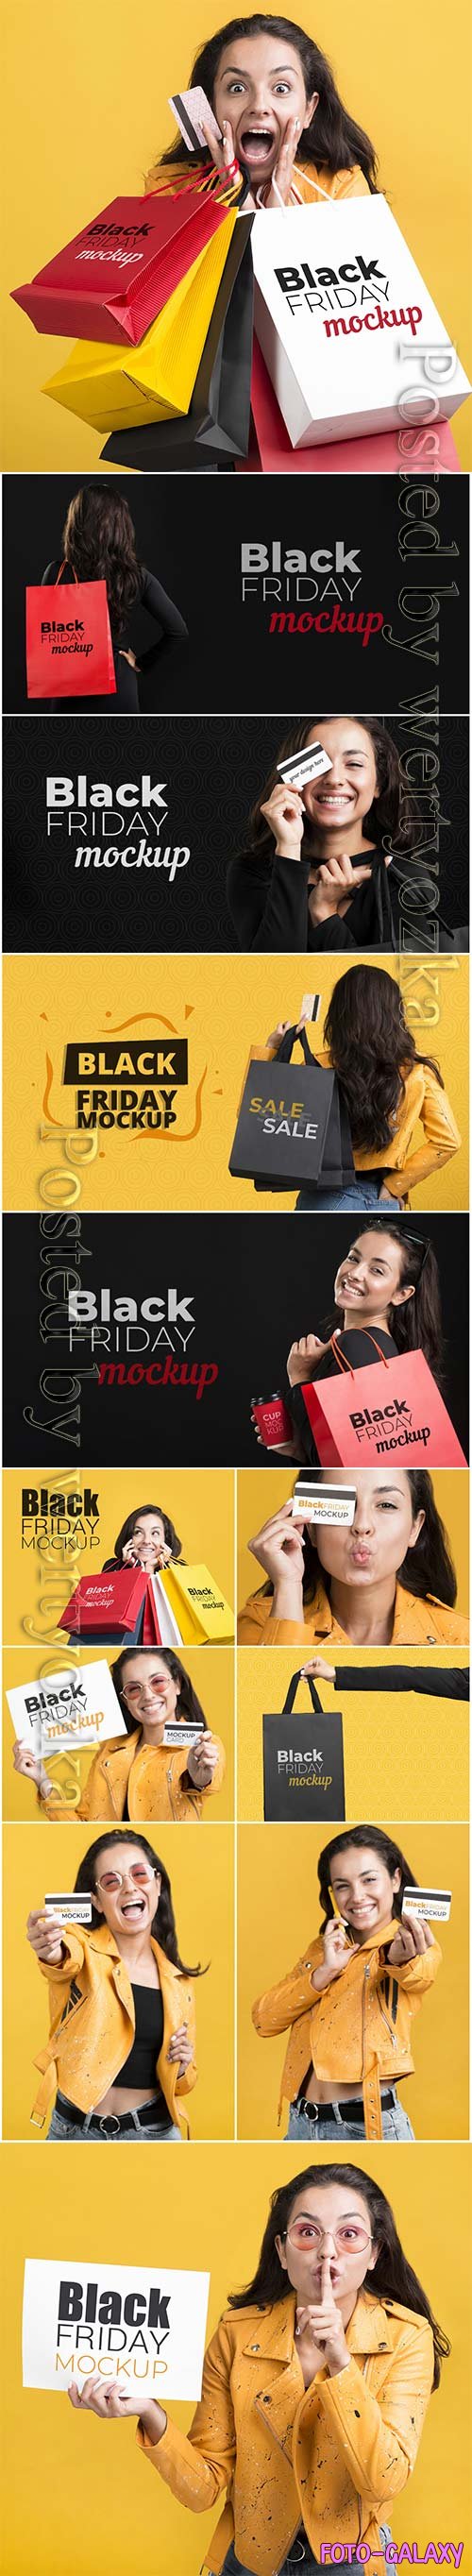 Woman with black friday concept psd template